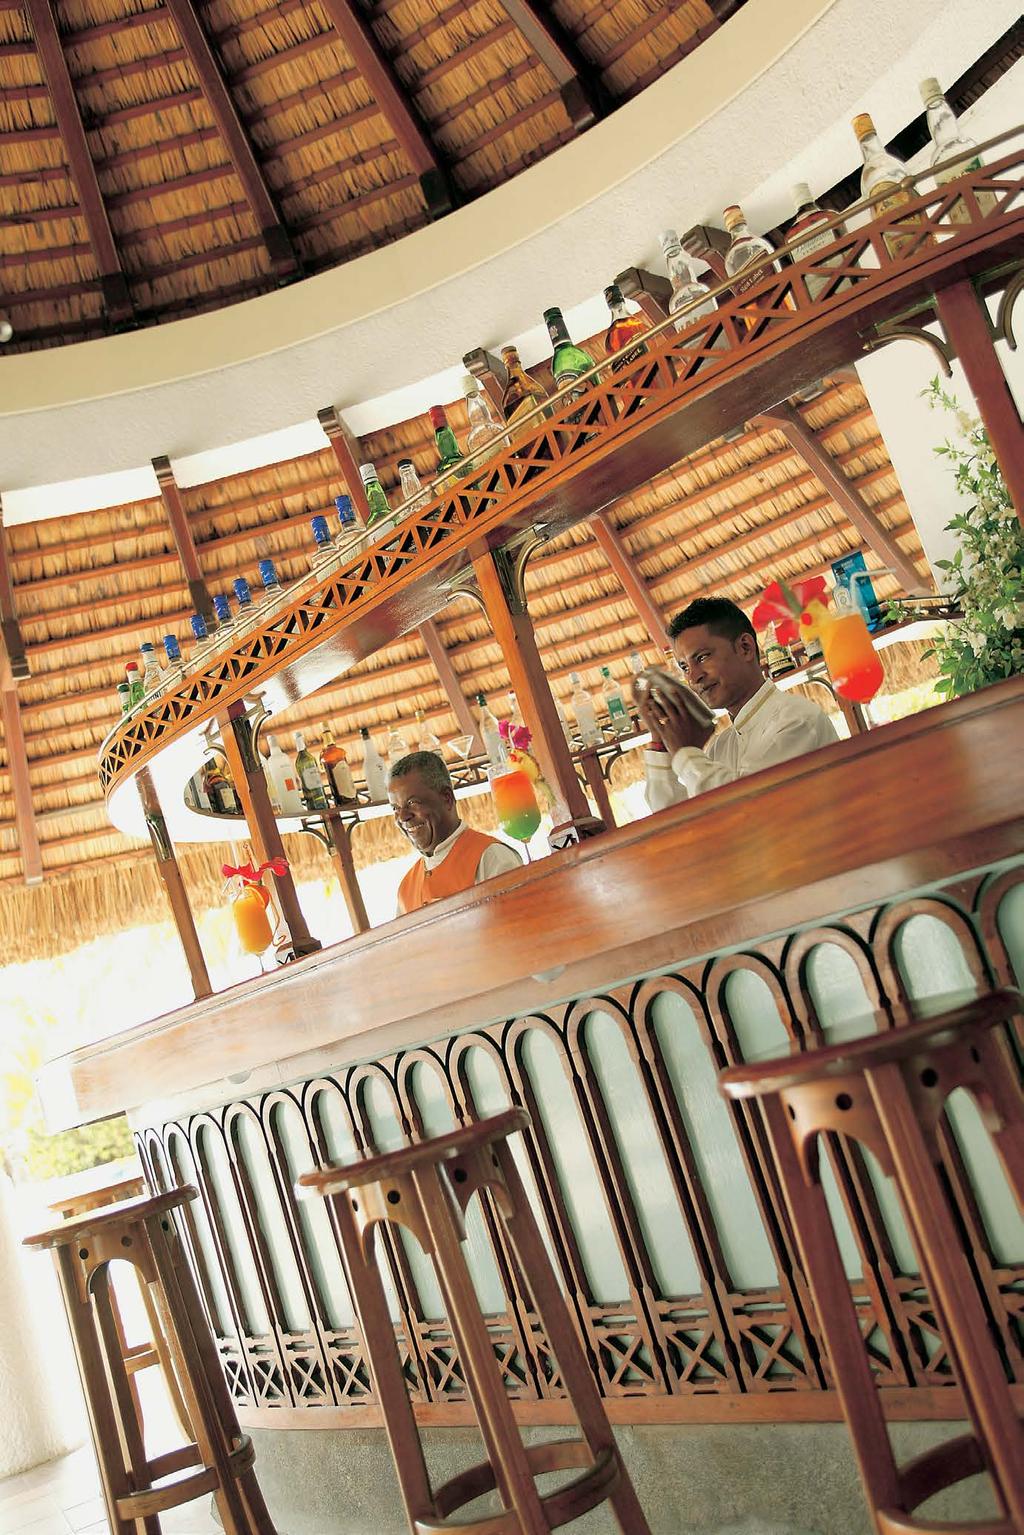 Bar Oasis Situated between two swimming pools, Oasis Bar is the perfect place to quench your thirst with friends, family or loved ones while admiring the infinity view of the Indian Ocean.